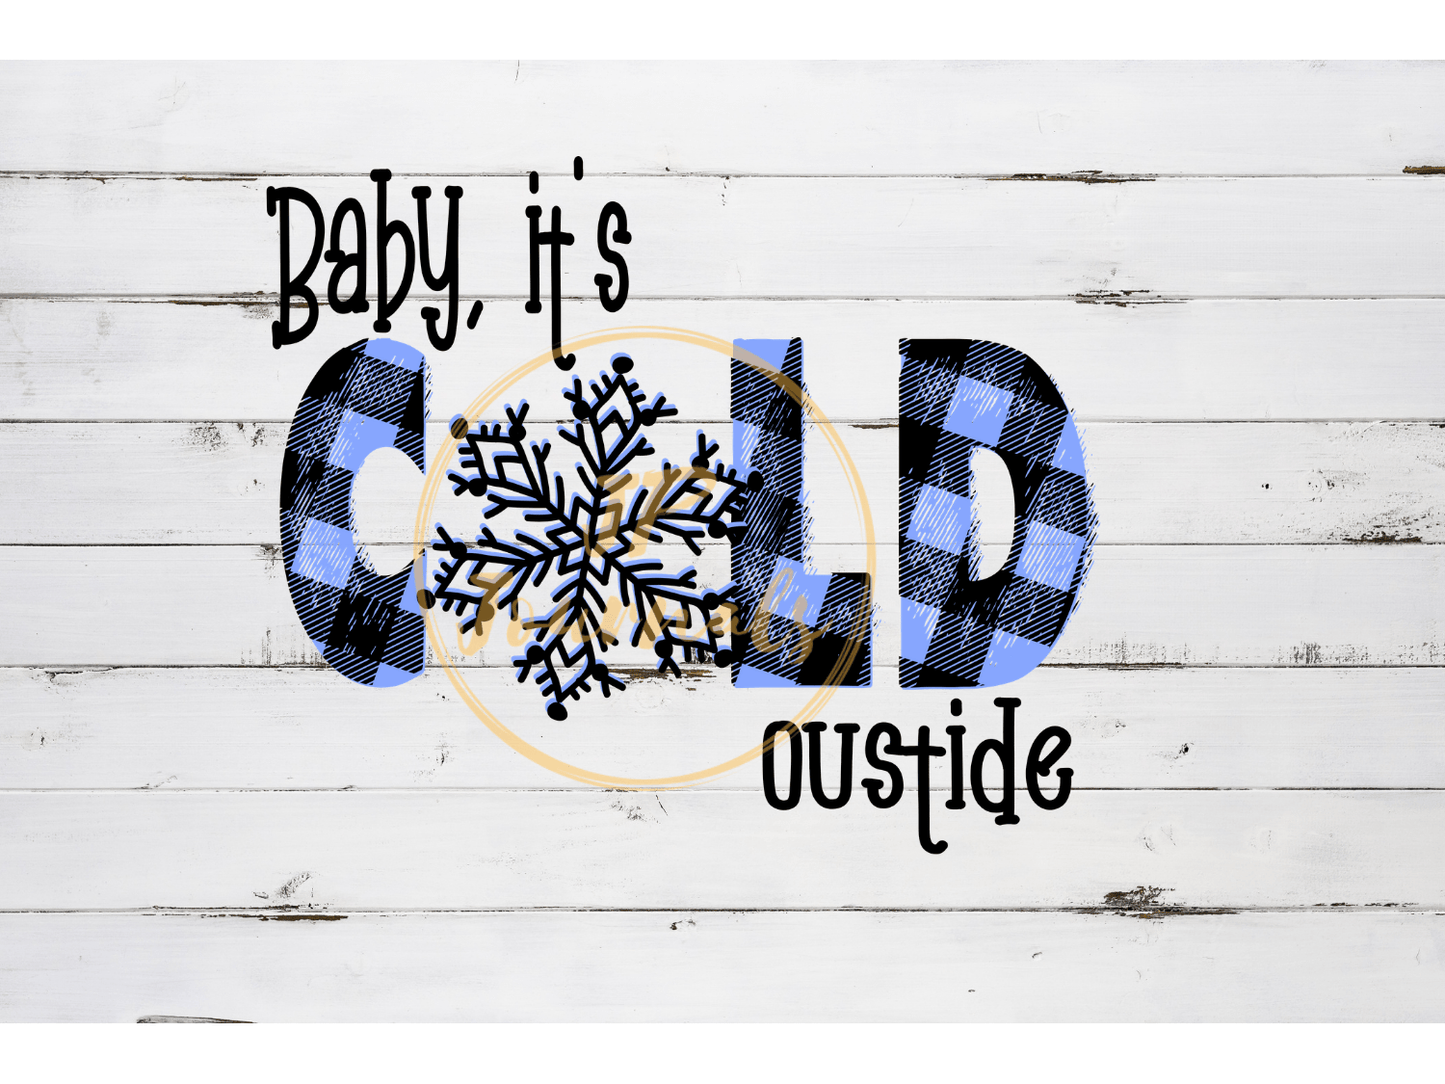 Baby It's Cold Outside Sublimation Design